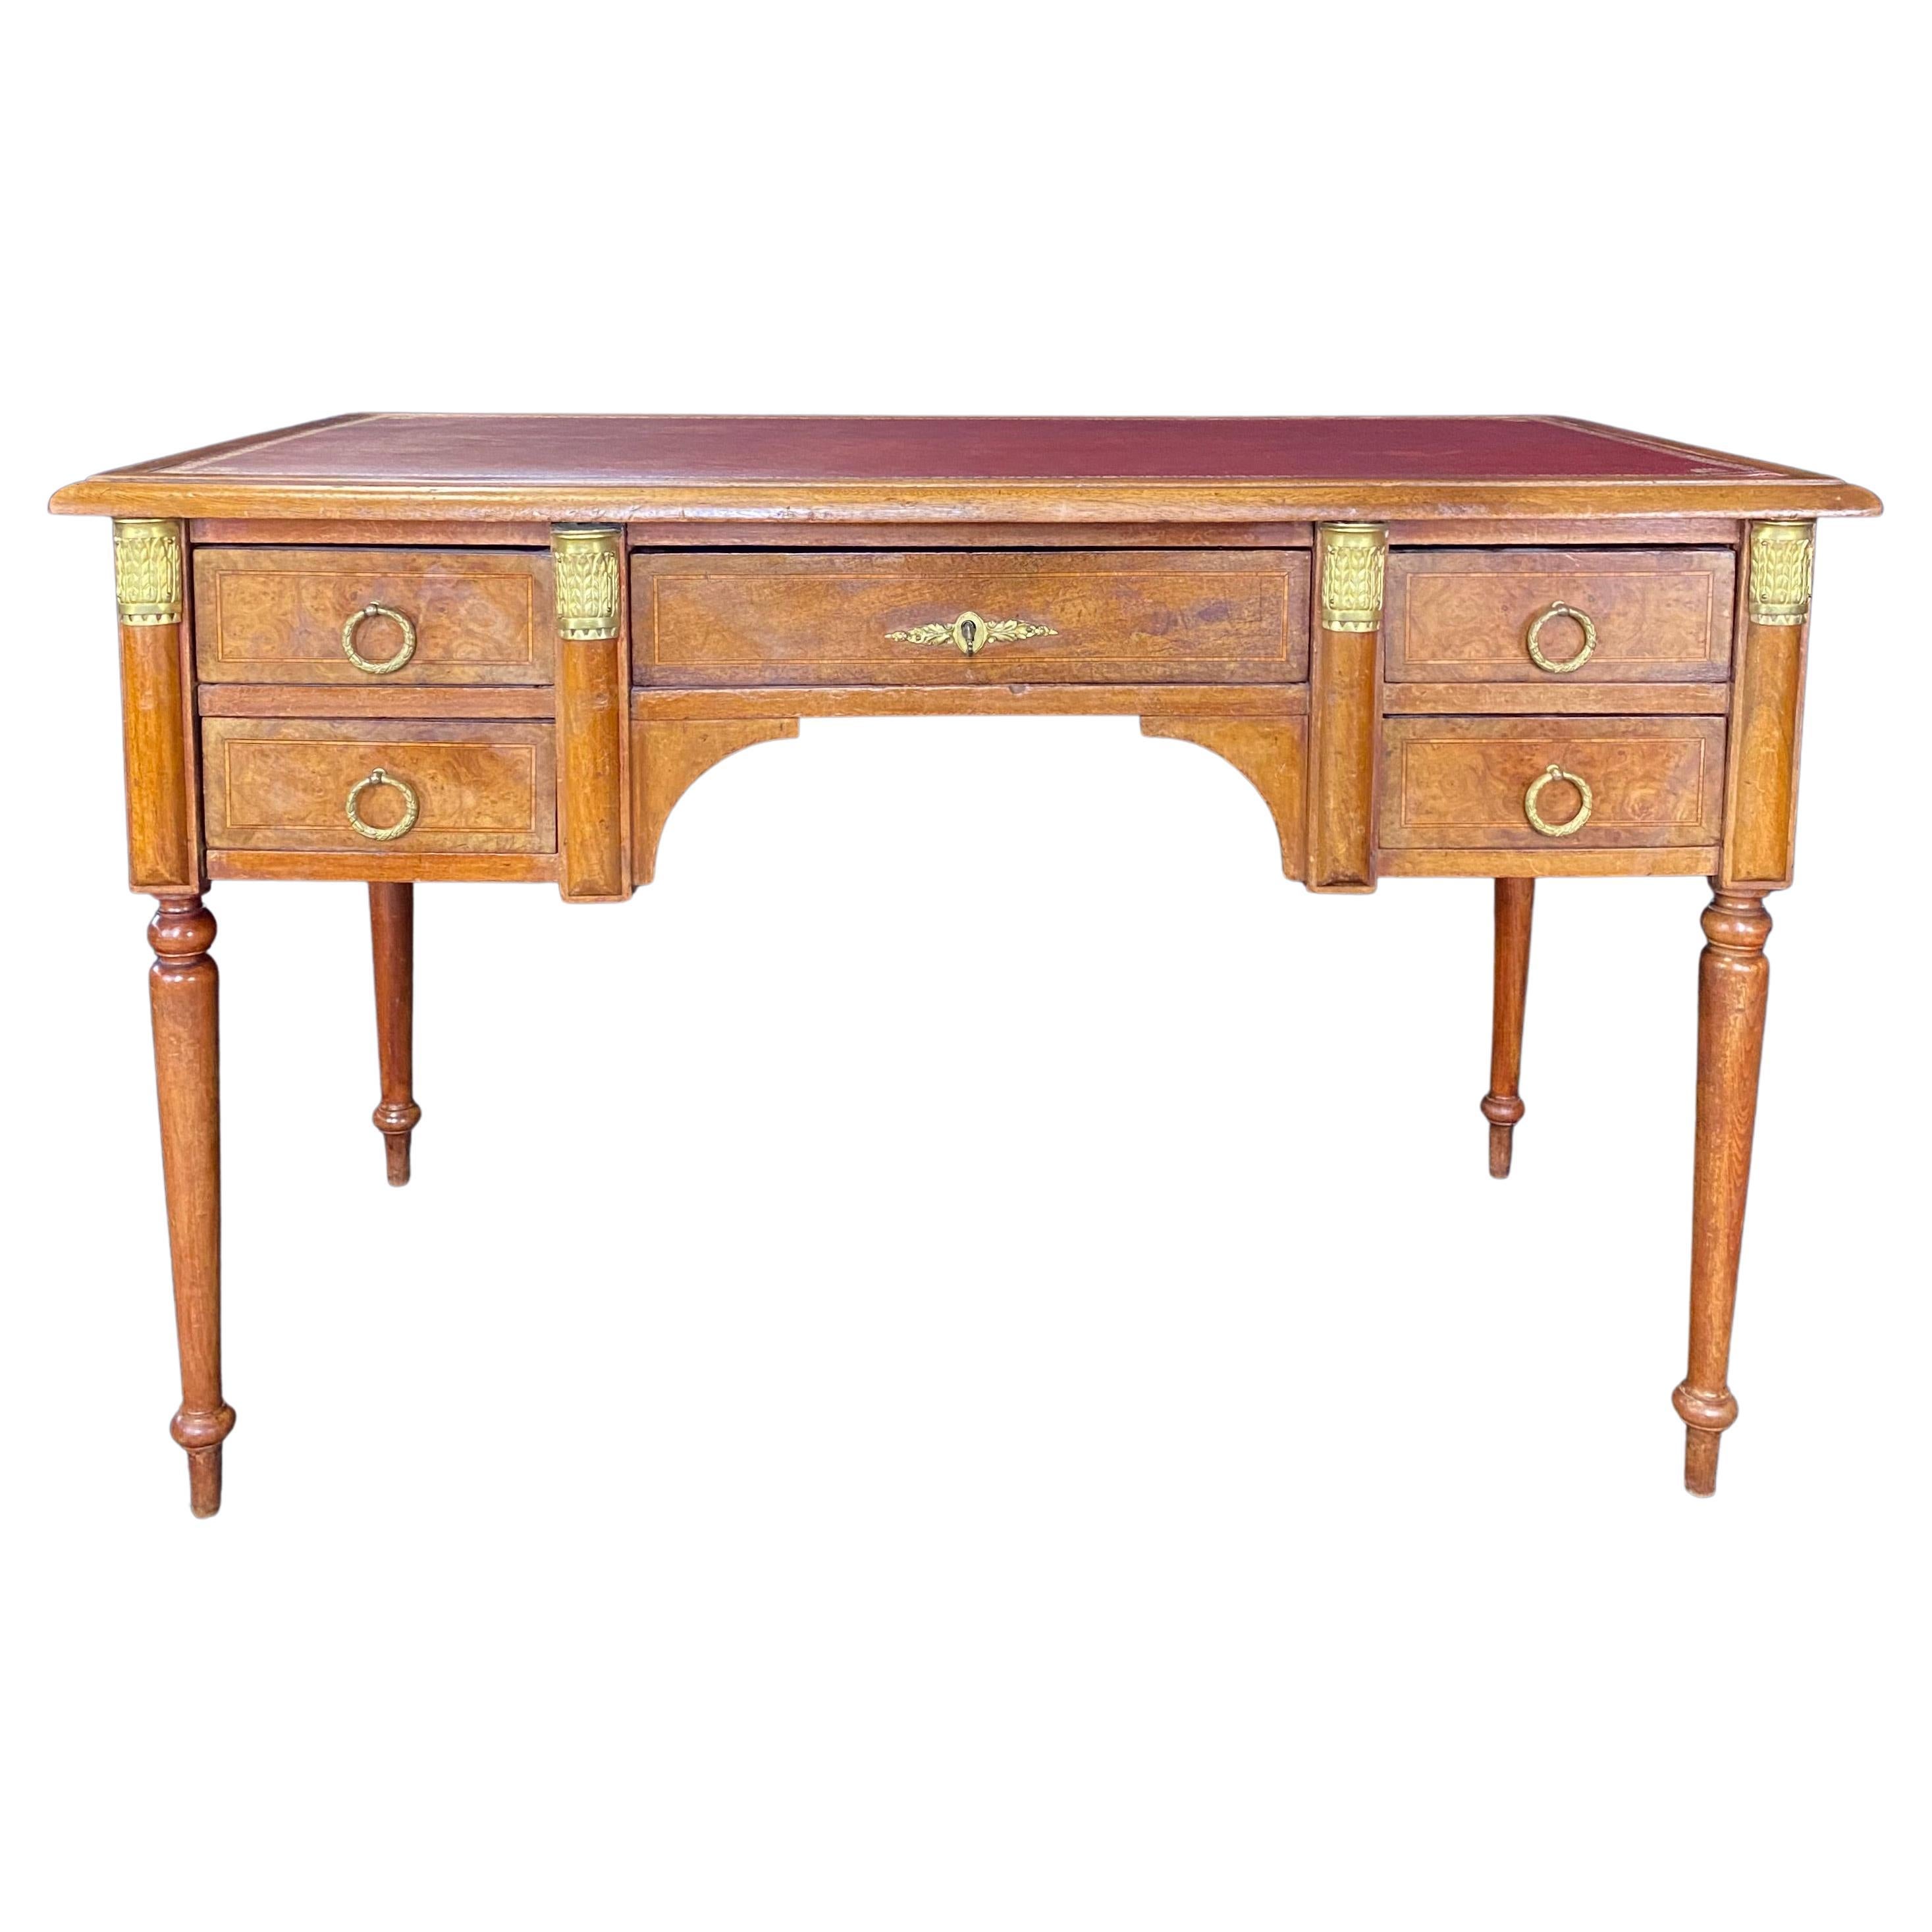 Just in from Avignon - this lovely French Louis XVI burled walnut desk has an inlaid molding on all five drawers and a beautiful red embossed leather top. Original key included. H skirt of opening 24.75” W opening 19
 #6159.

 